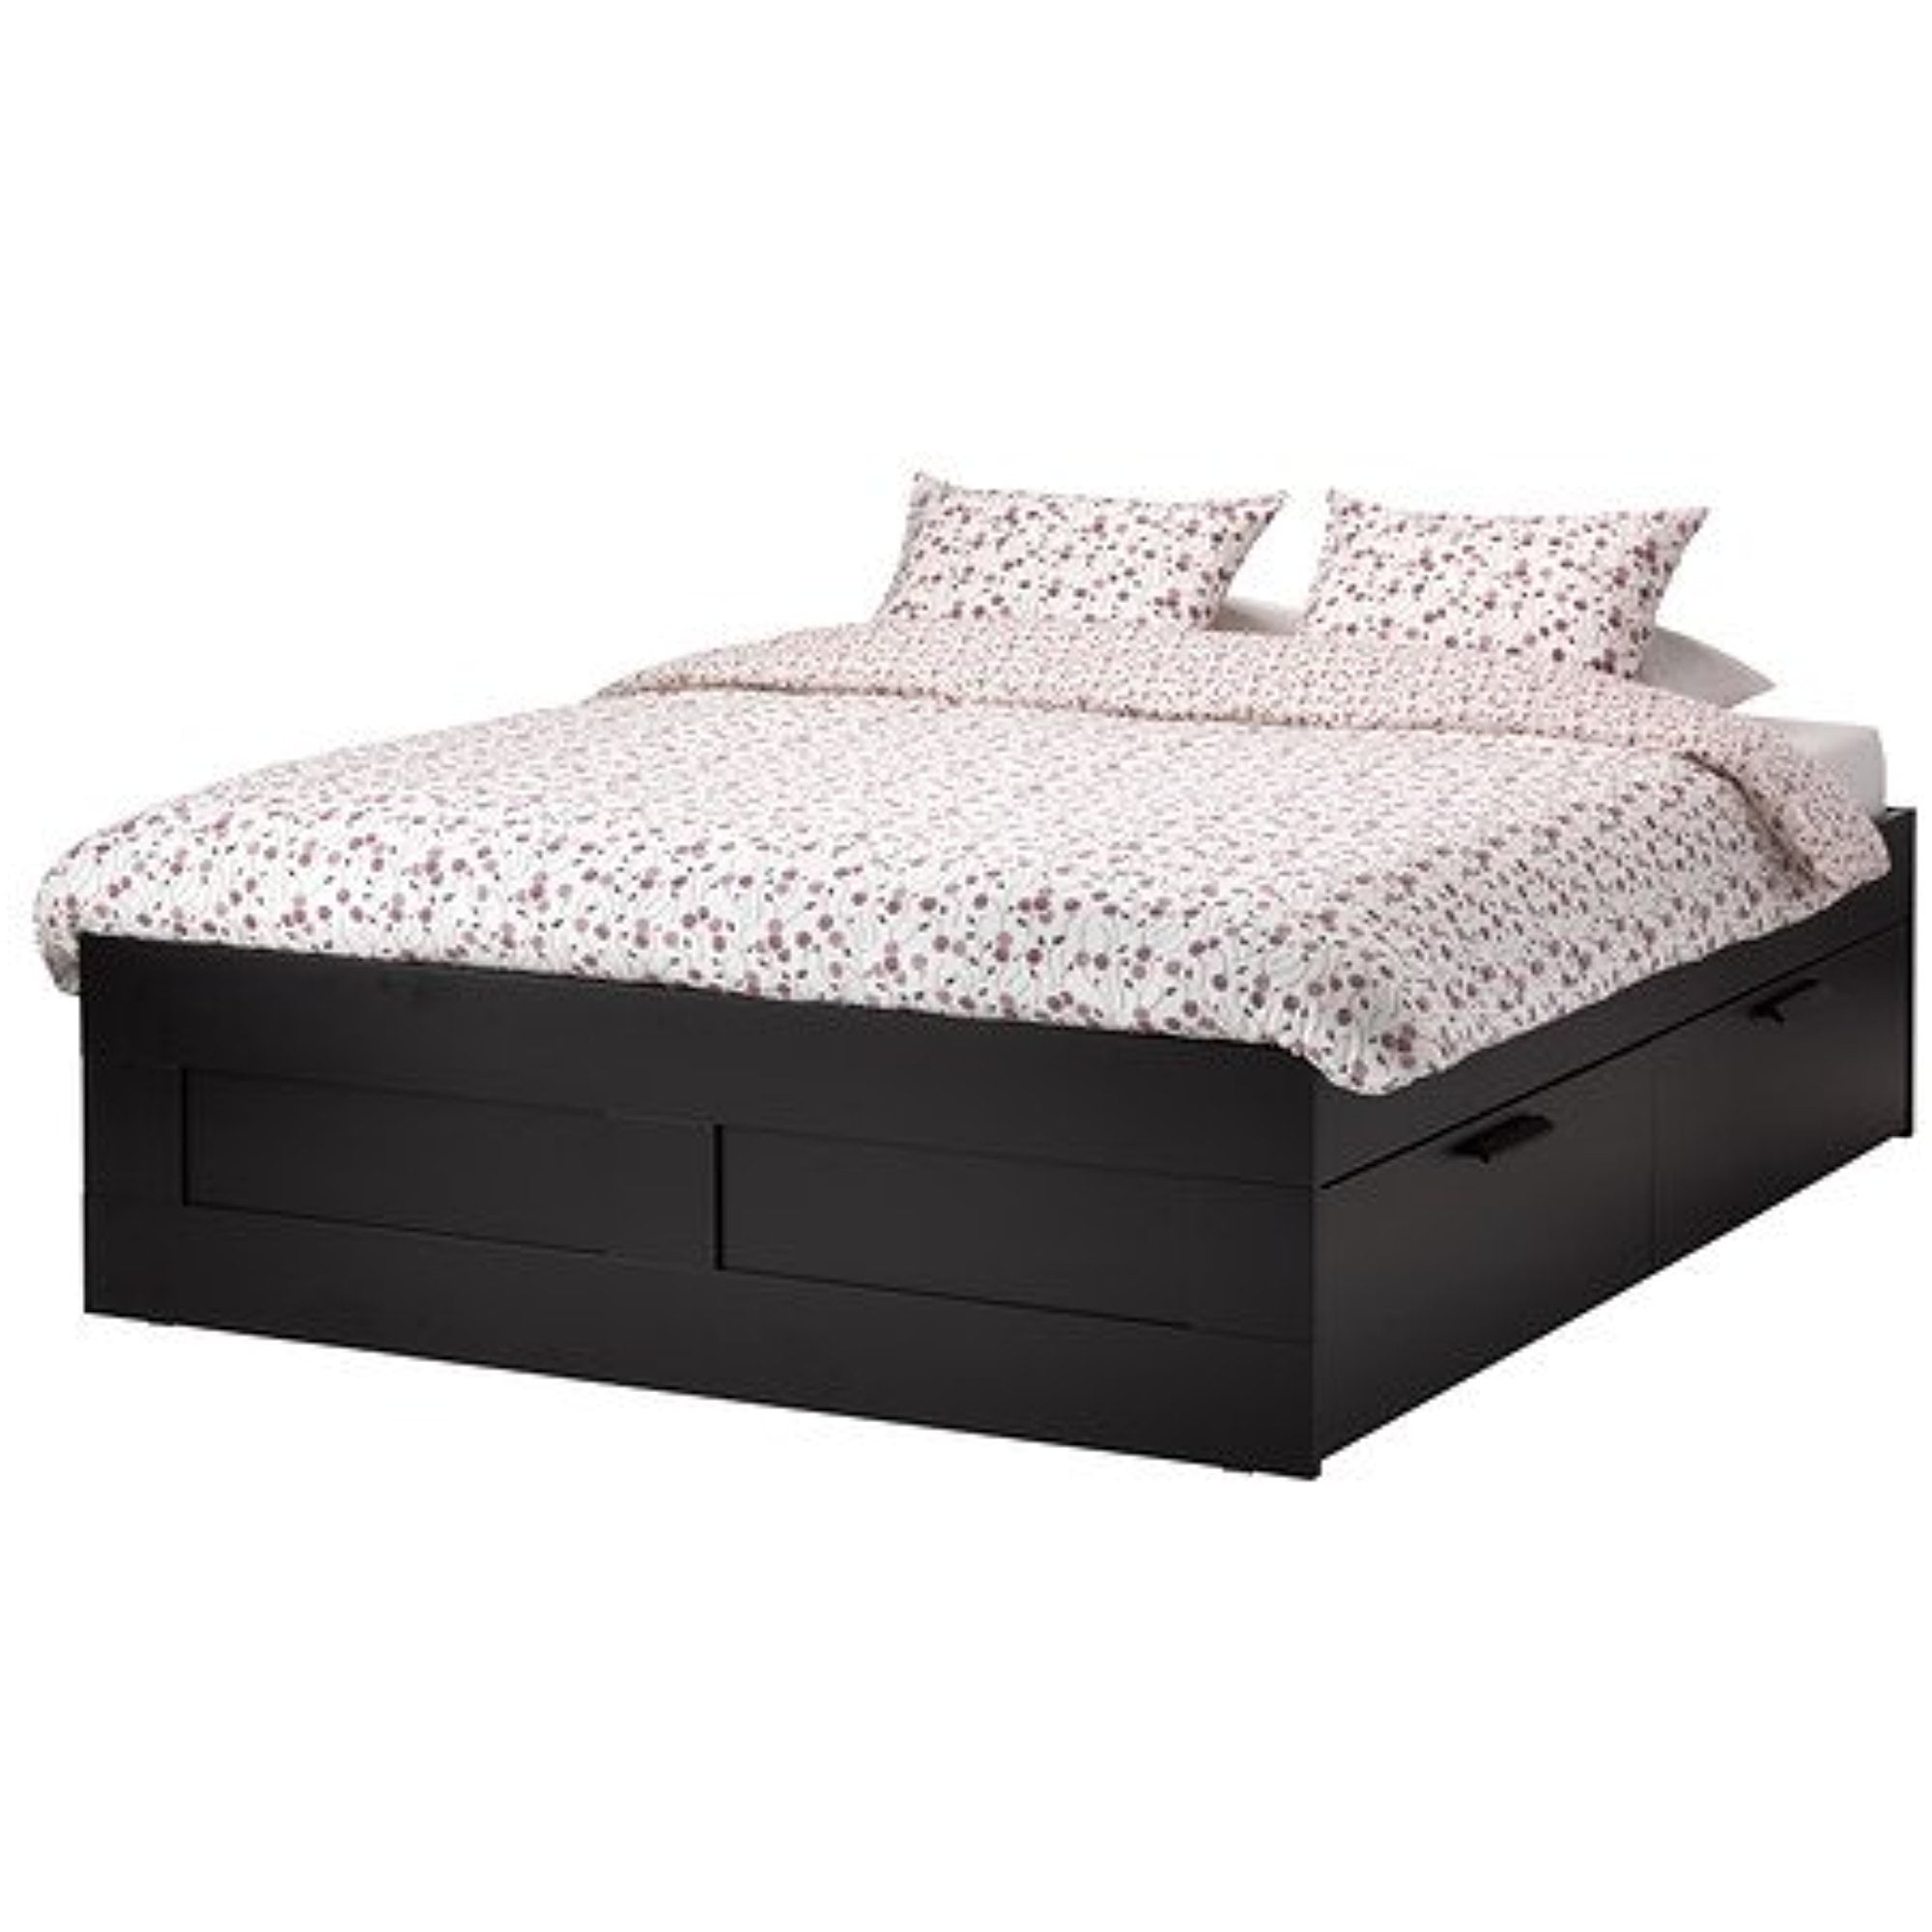 Ikea Queen Size Bed Frame With Storage, Full Size Bed Frame With Headboard Ikea